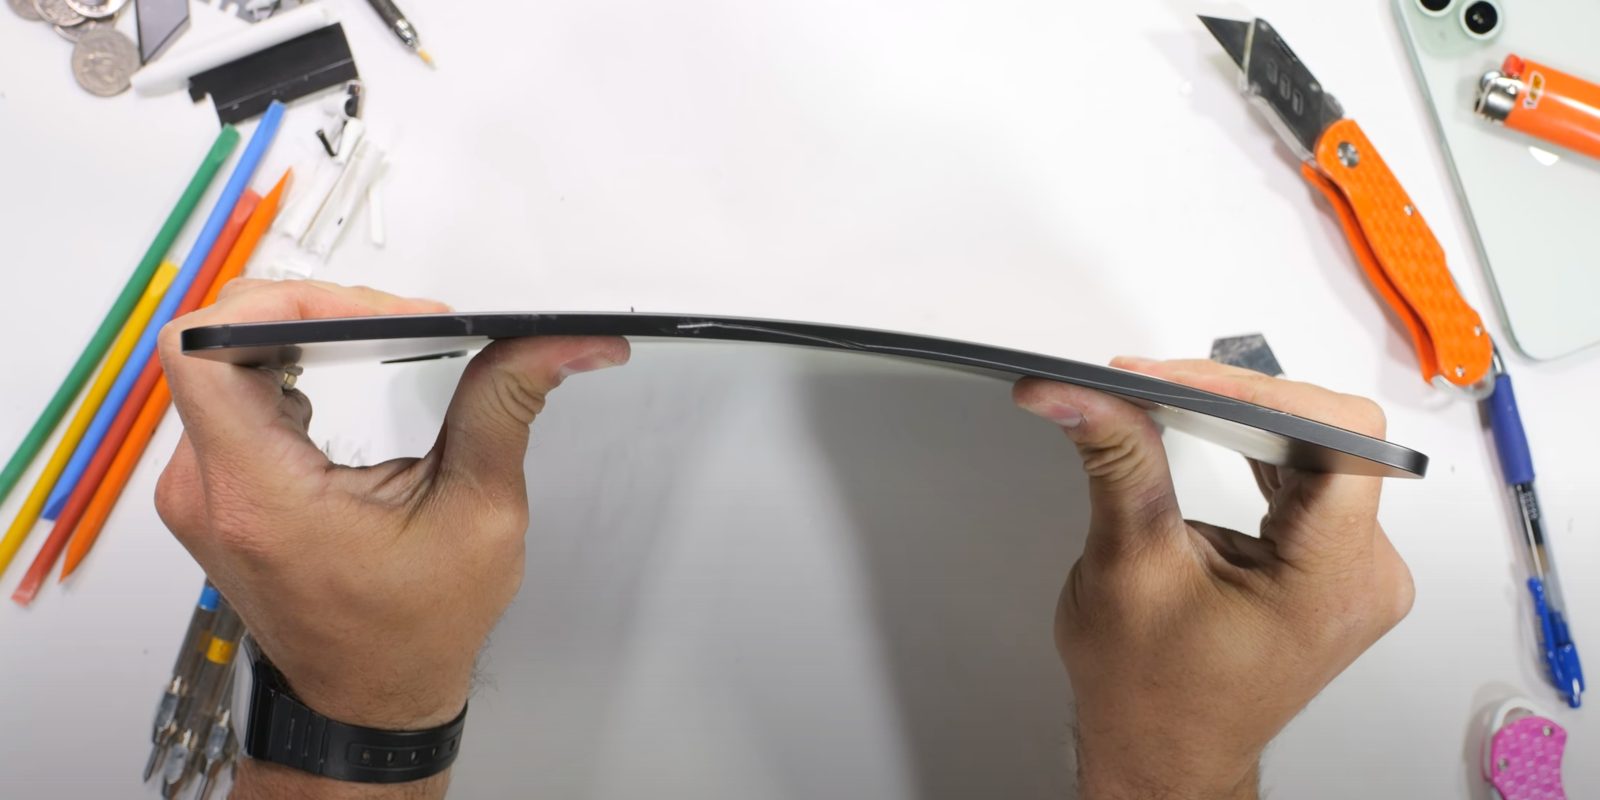 New iPad Pro performs well in extreme bend test, beats previousgen